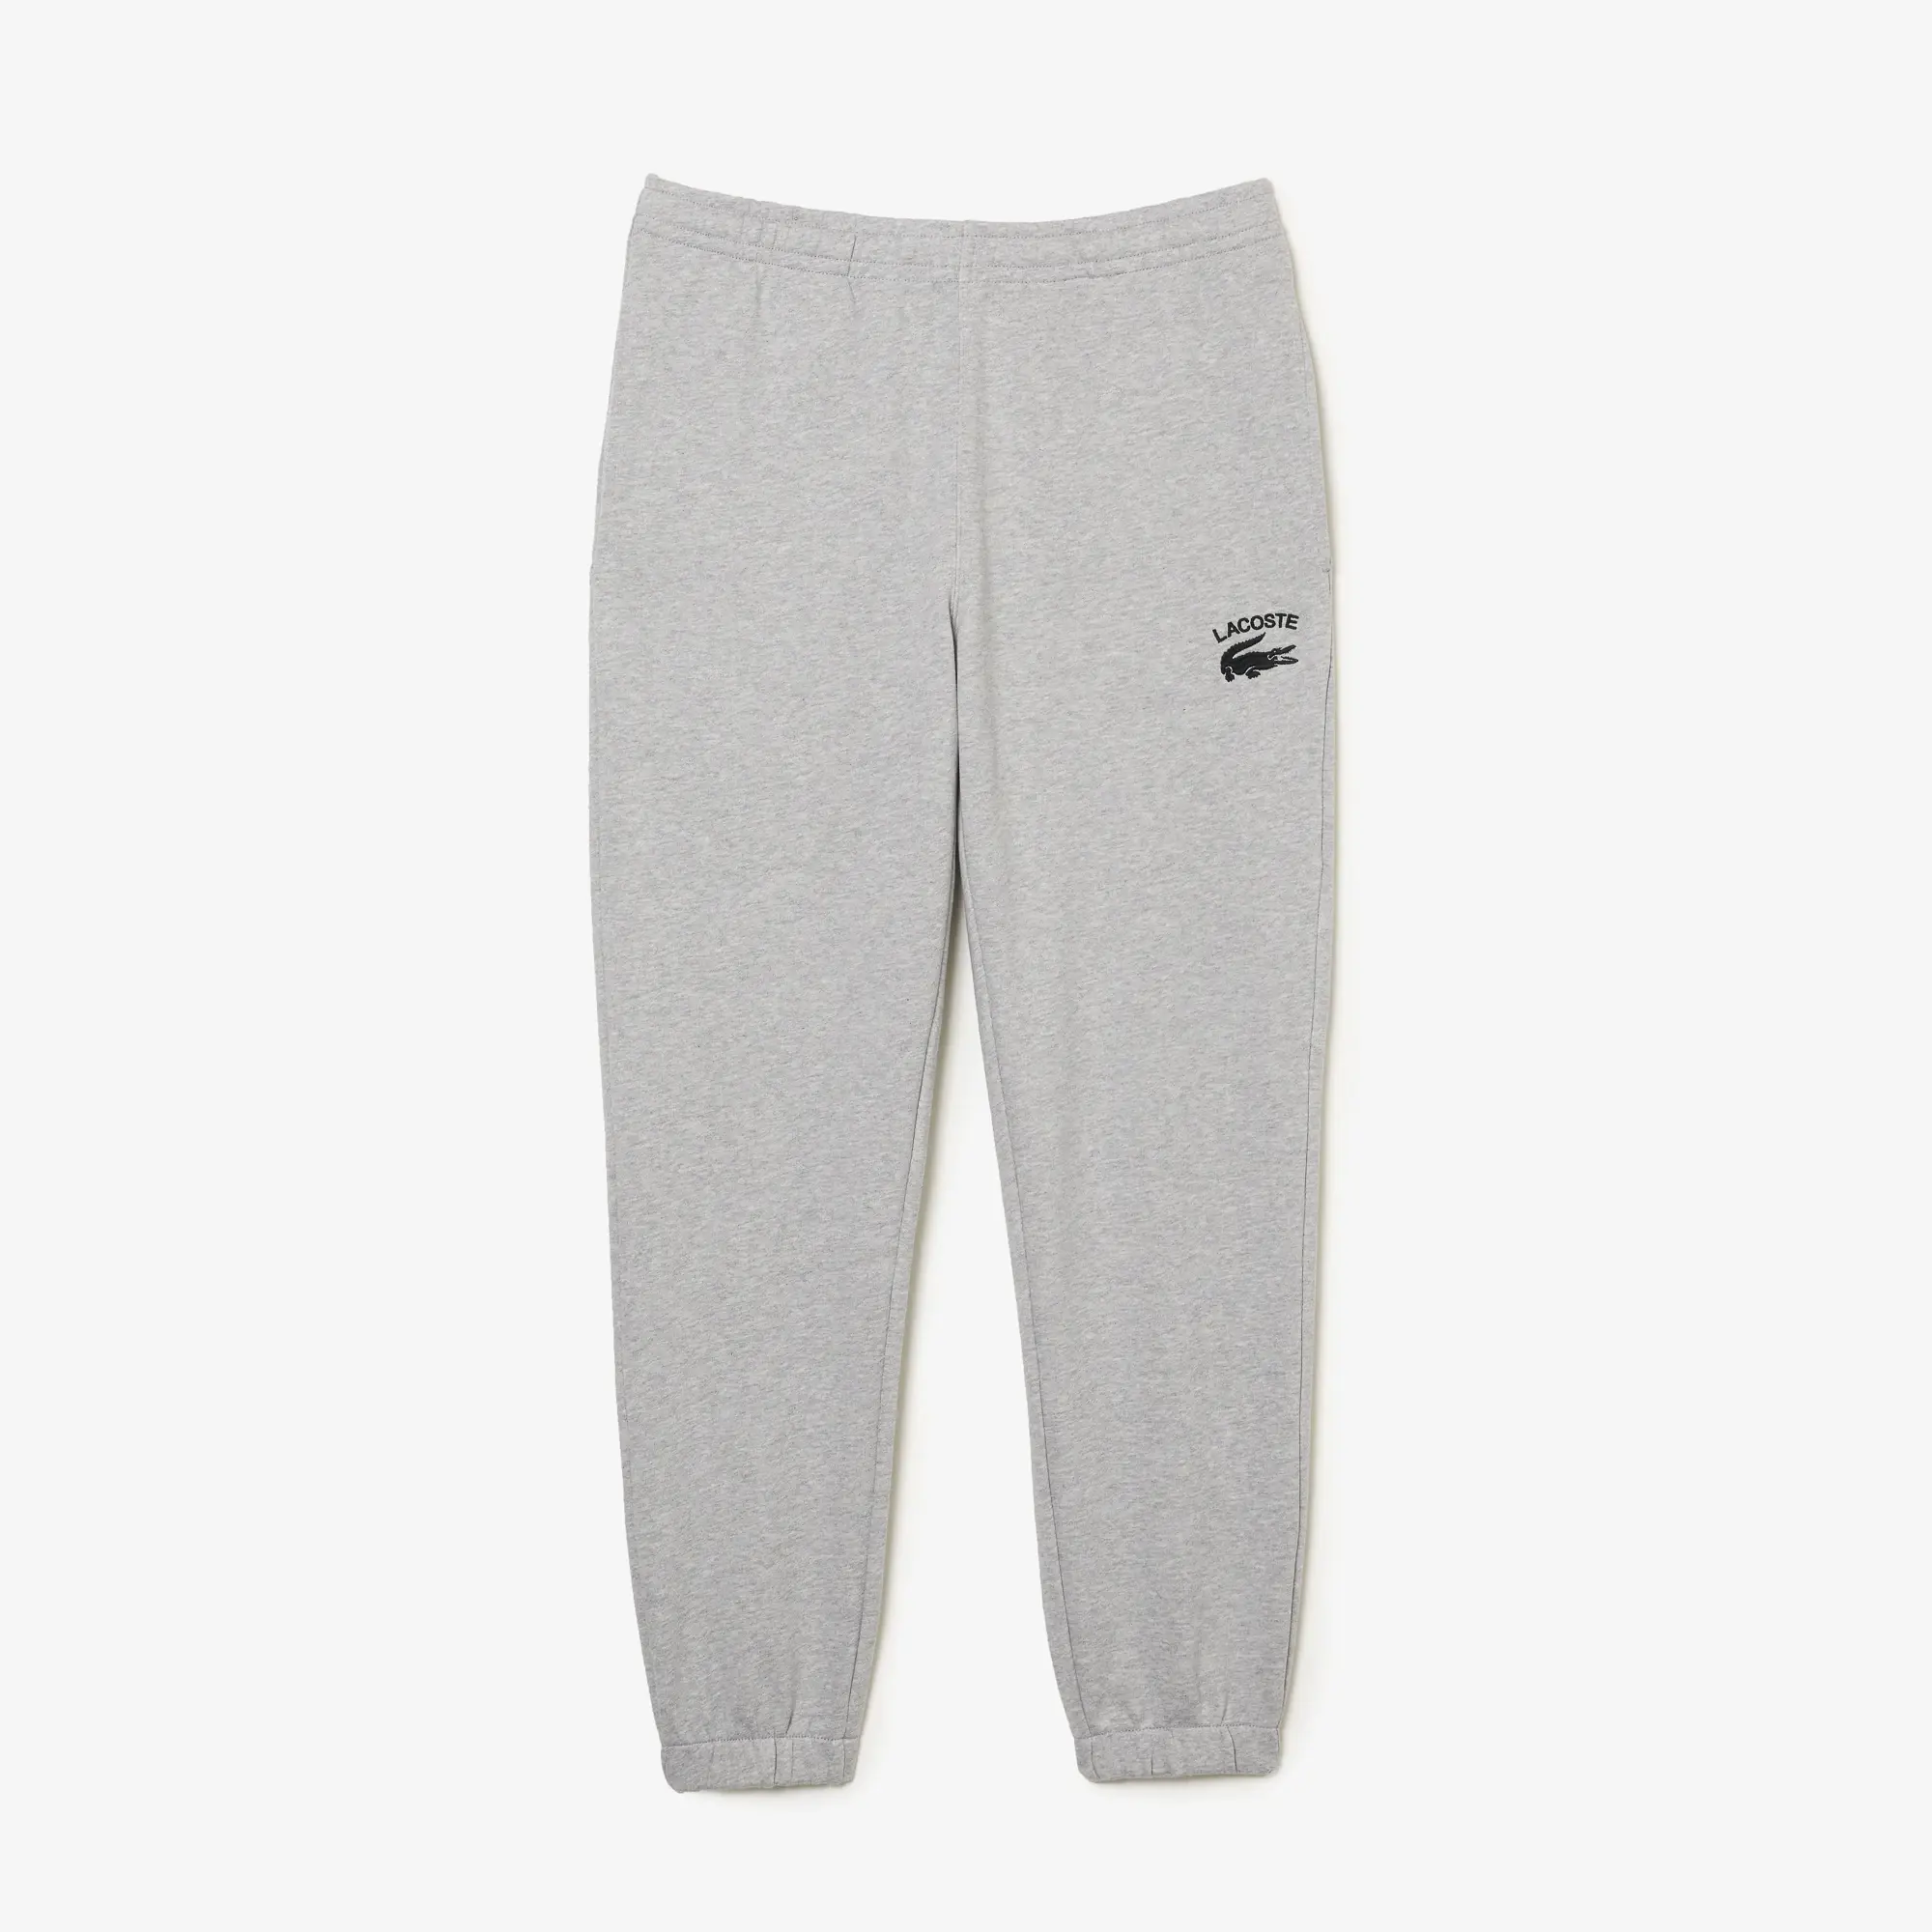 Lacoste Men's Tapered Fit Sweatpants. 1